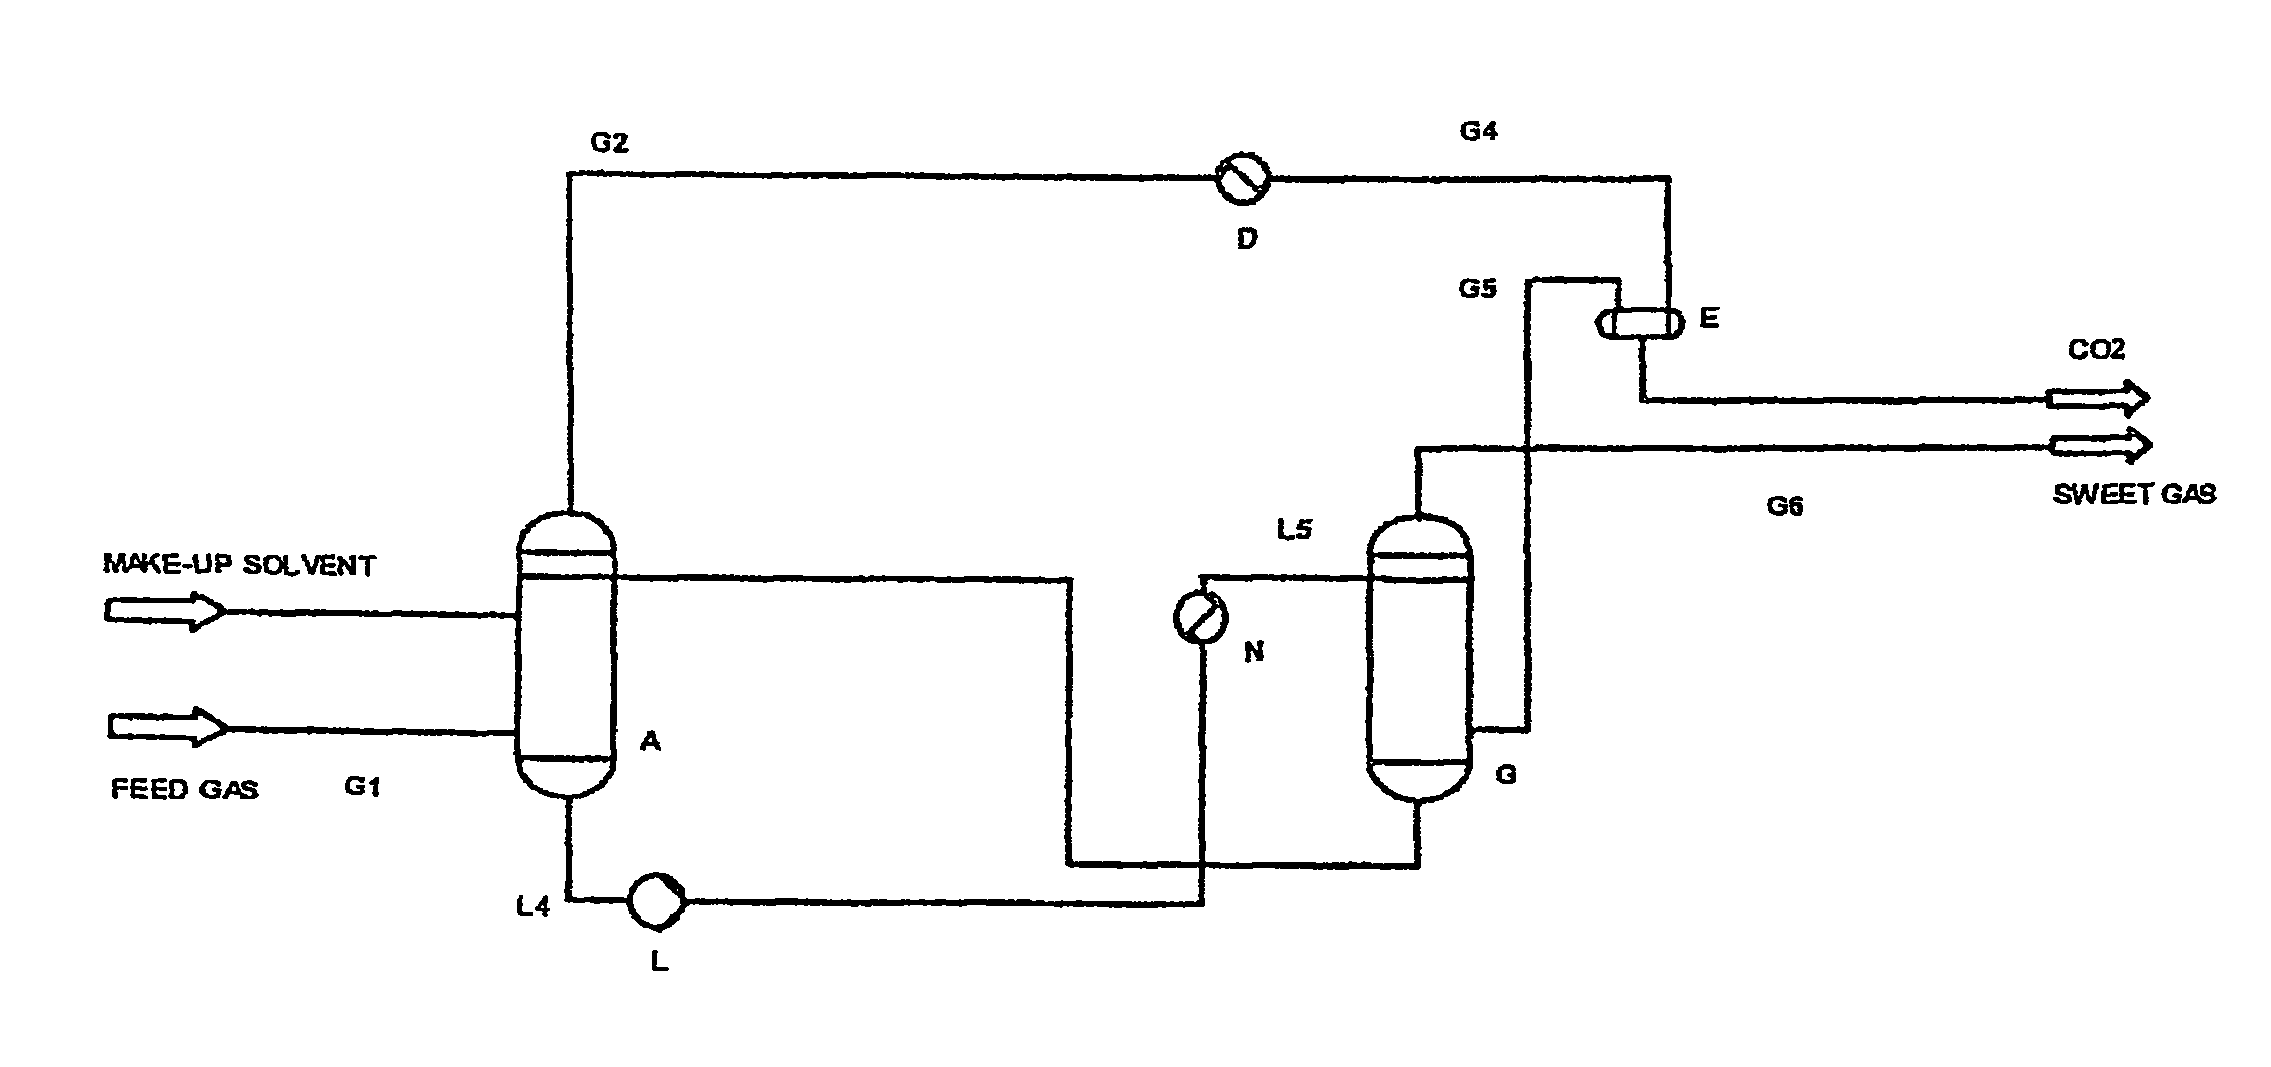 Removal of carbon dioxide from a feed gas